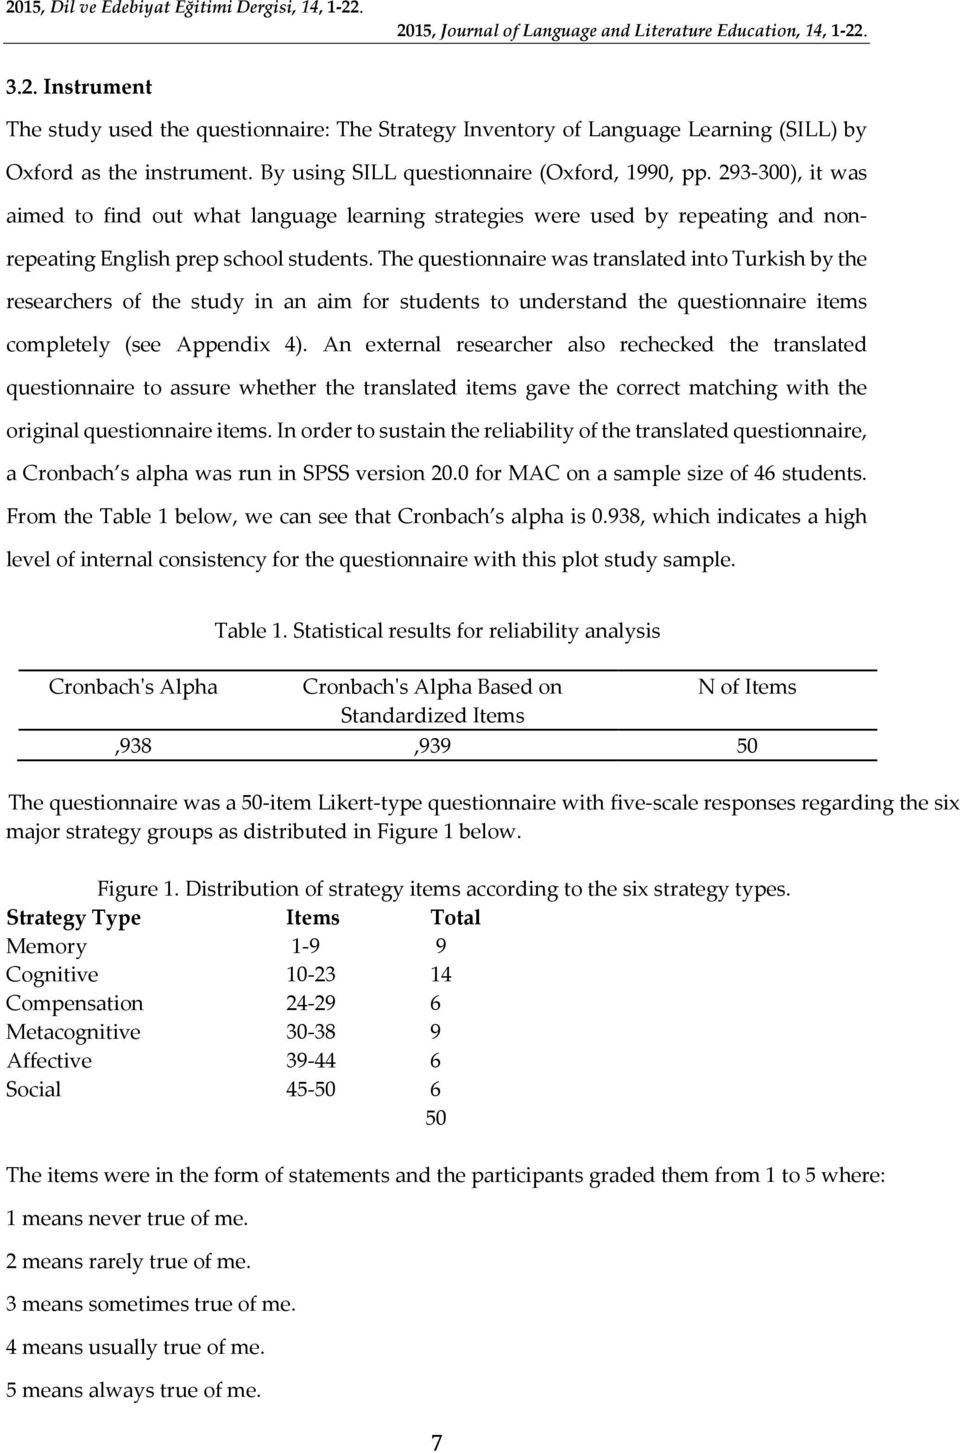 The questionnaire was translated into Turkish by the researchers of the study in an aim for students to understand the questionnaire items completely (see Appendix 4).